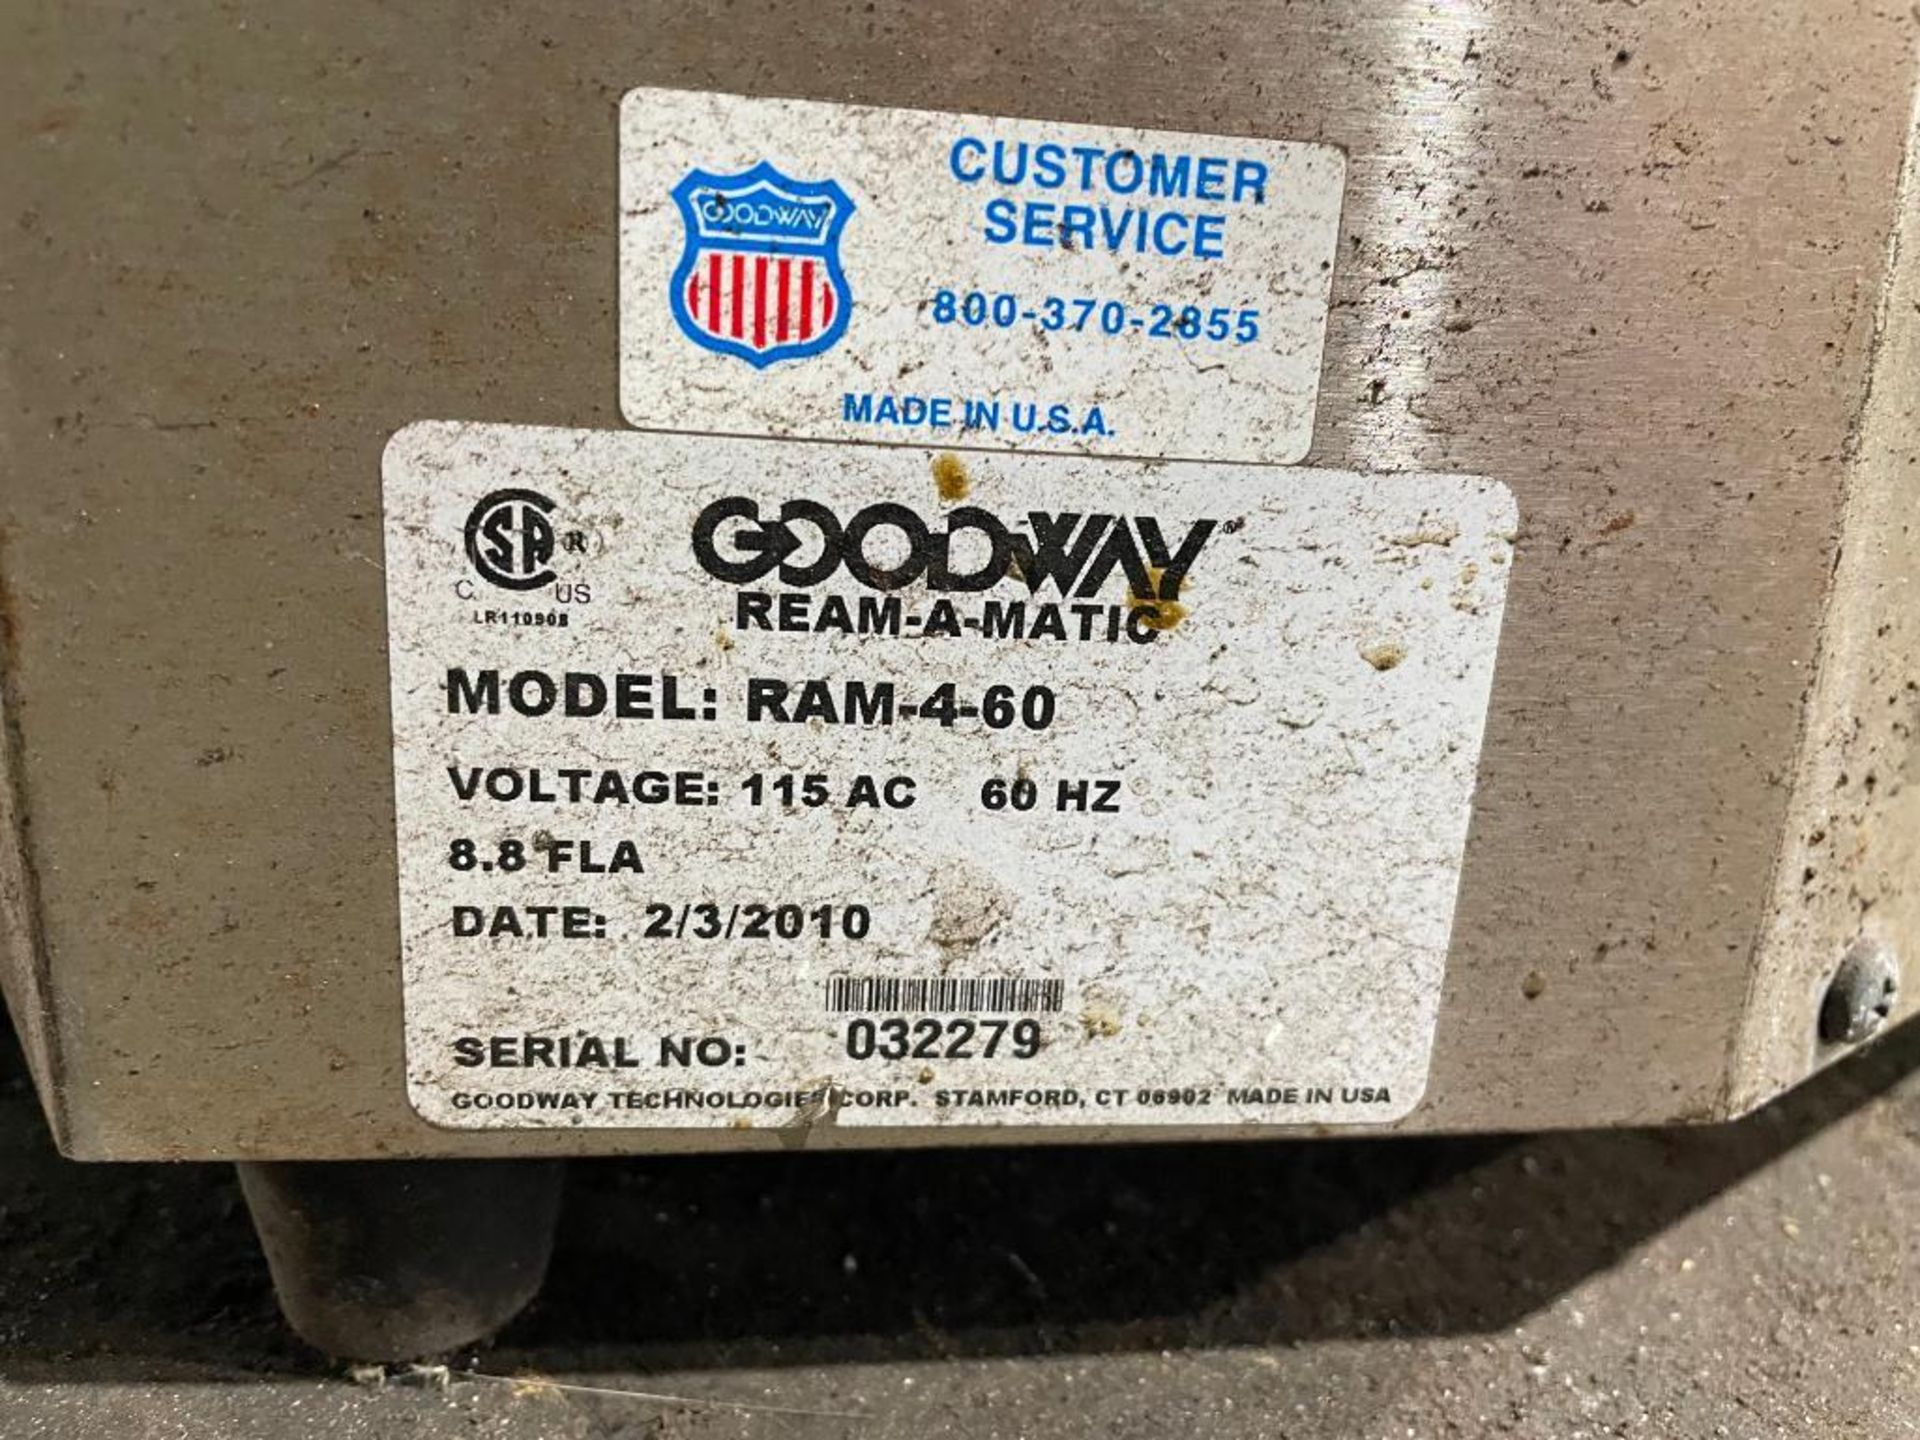 DESCRIPTION GOODWAY REAM-A-MATIC 4X ROTARY TUBE BOILER FIRETUBE CLEANER BRAND/MODEL GOODWAY REAM-A-M - Image 7 of 10